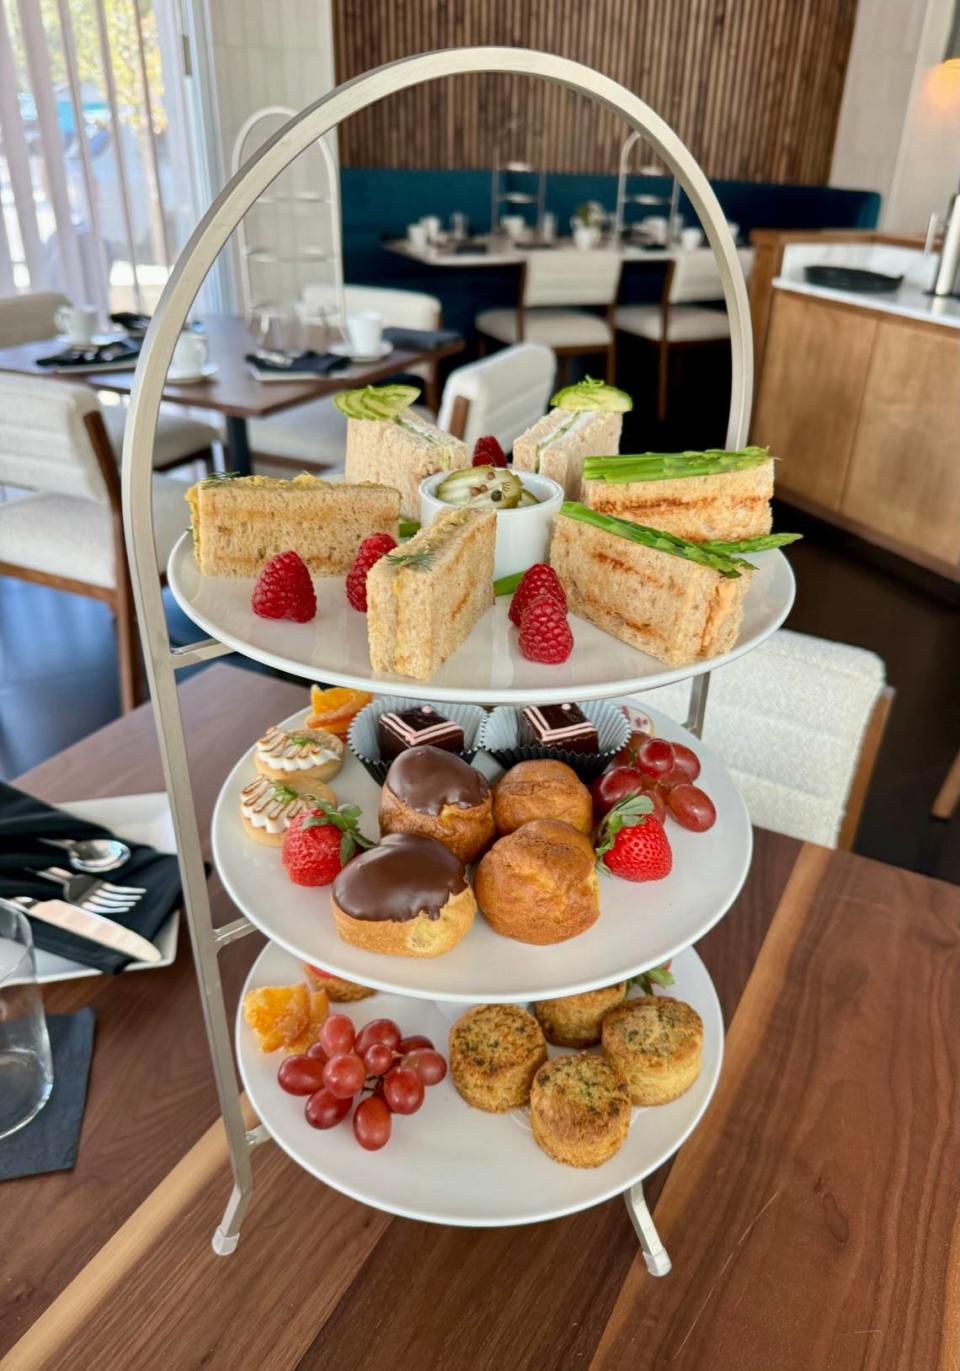 Maiden offers a plant-based, vegan afternoon tea service.